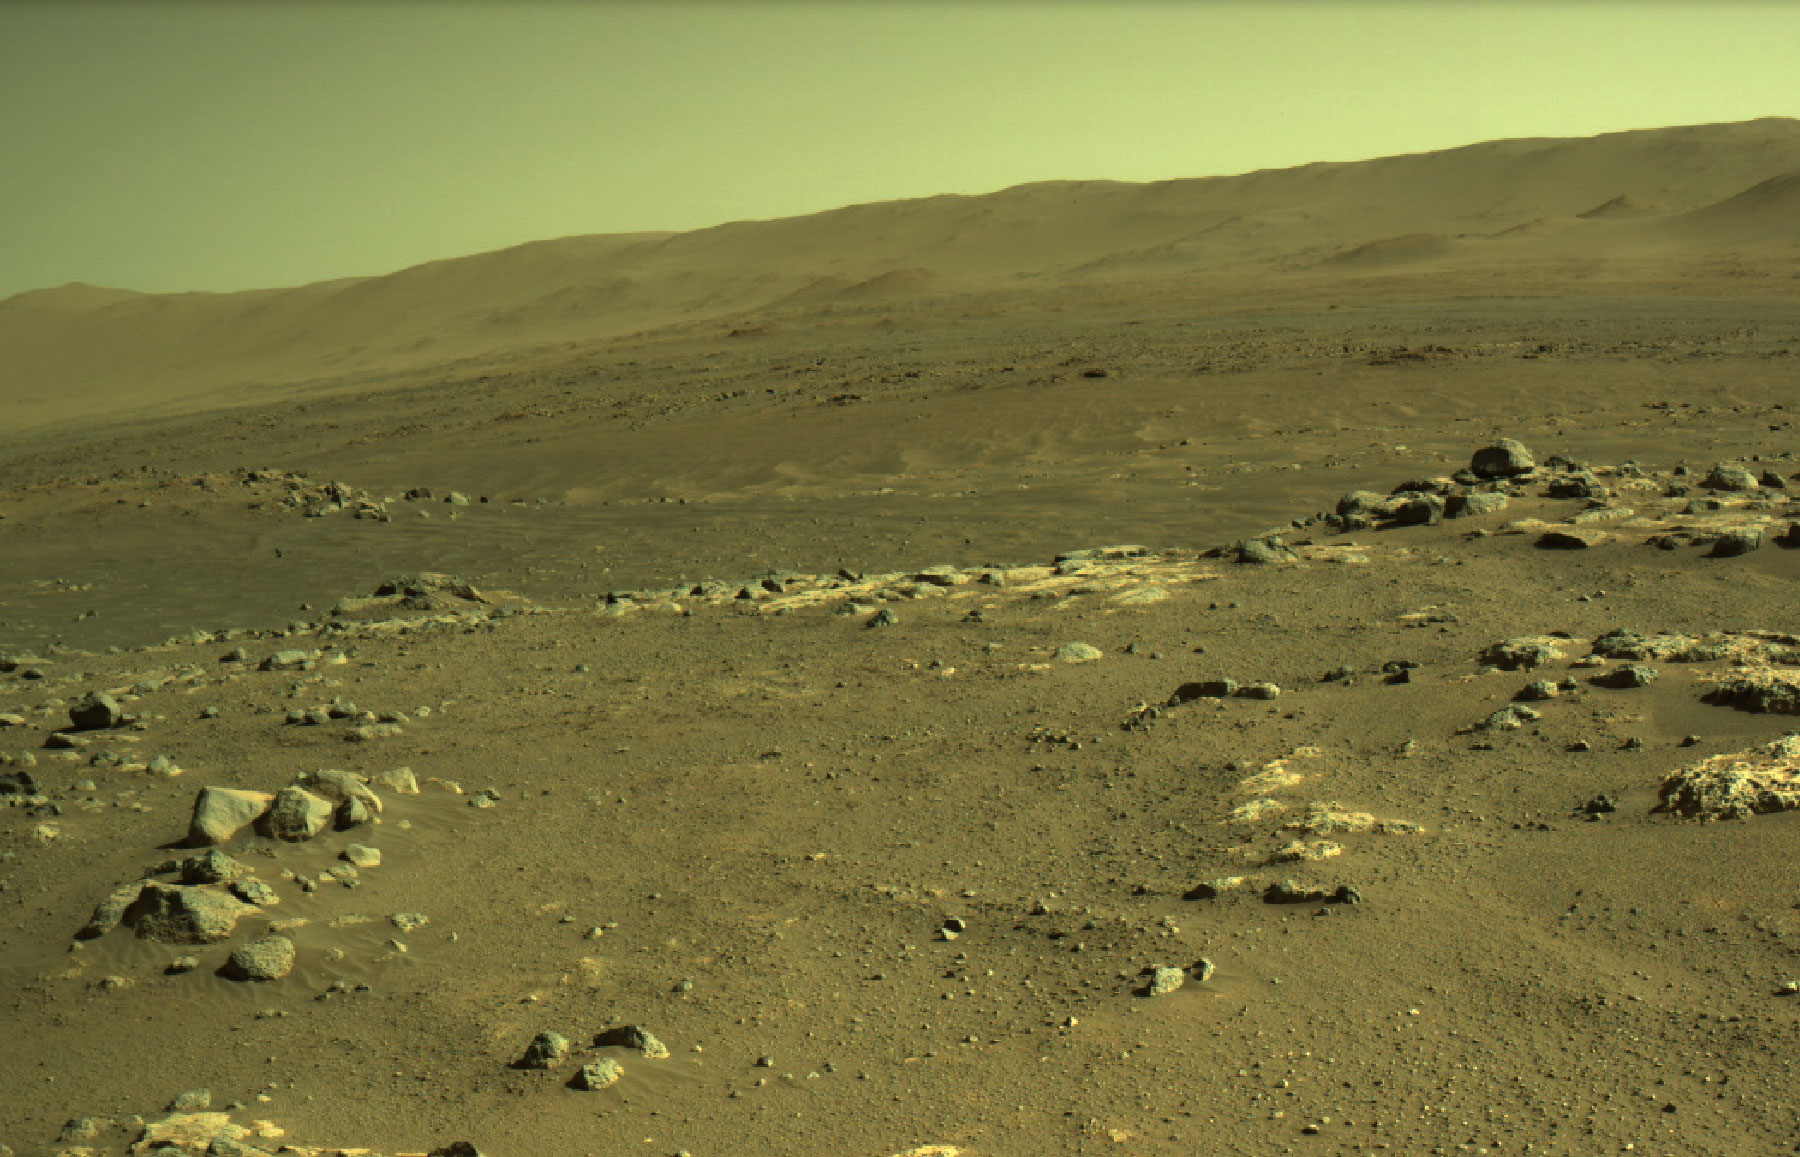 Perseverance rover took this image overlooking the sandy “Séítah” region. The Ingenuity helicopter flew over this region during its ninth flight and it shows the rocky surface of mars and hills in the background.